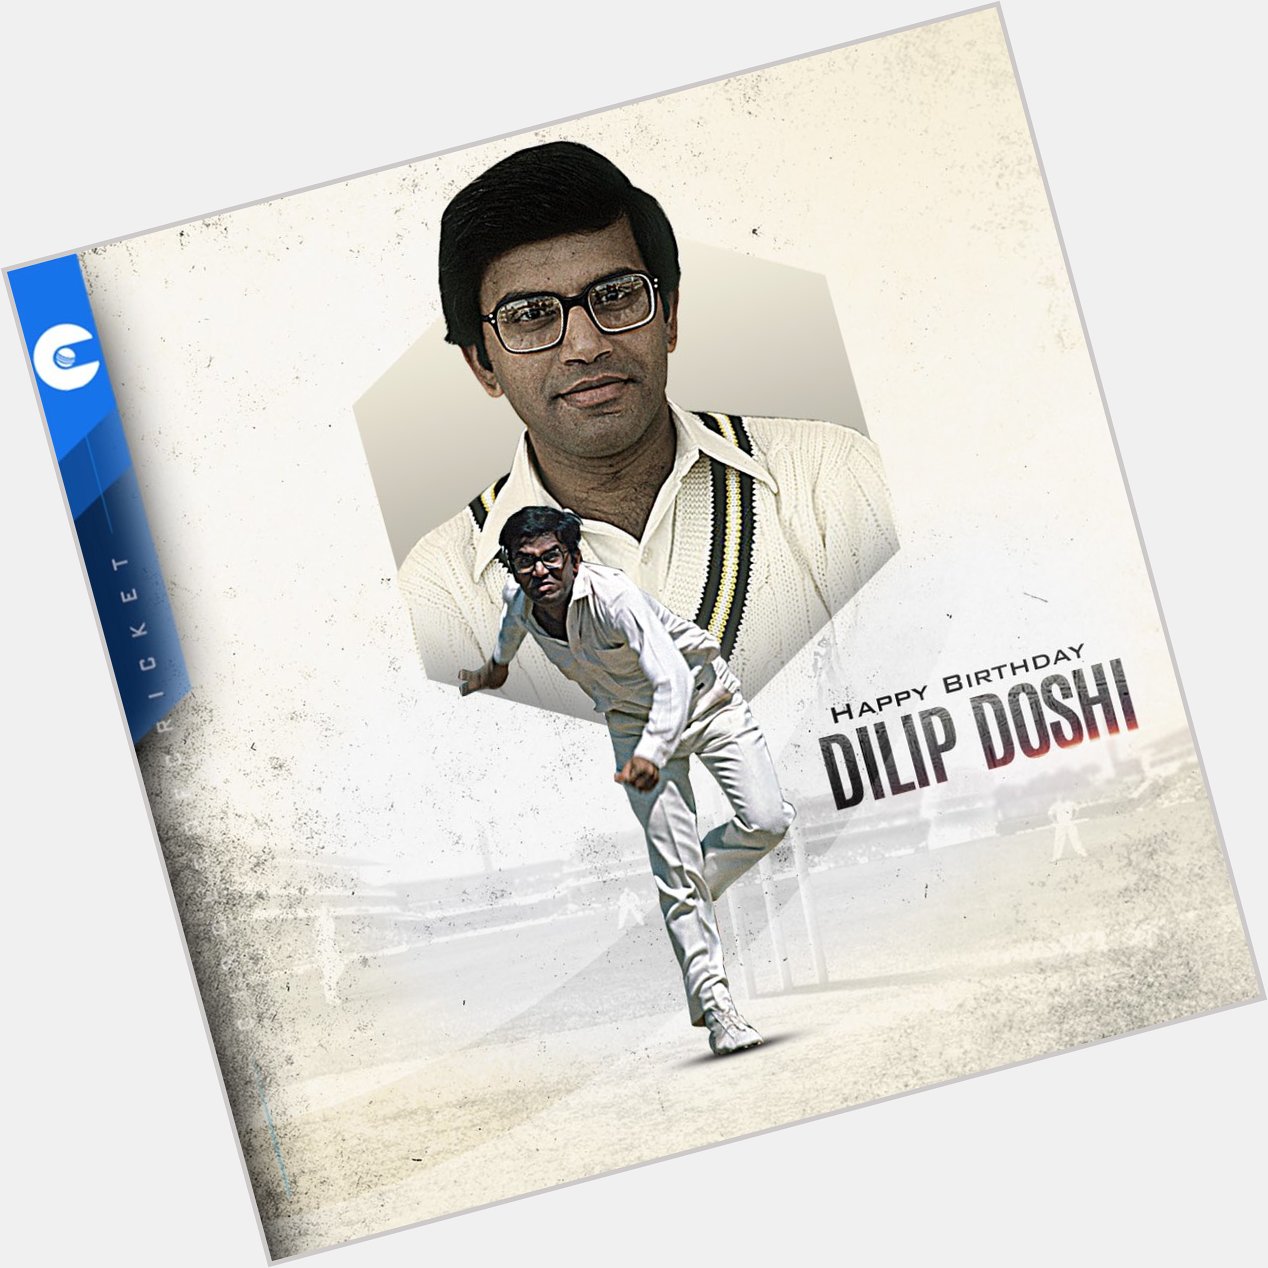 A fine left-arm spinner of his time, with 114 wickets in Test cricket for India.
Happy Birthday, Dilip Doshi 